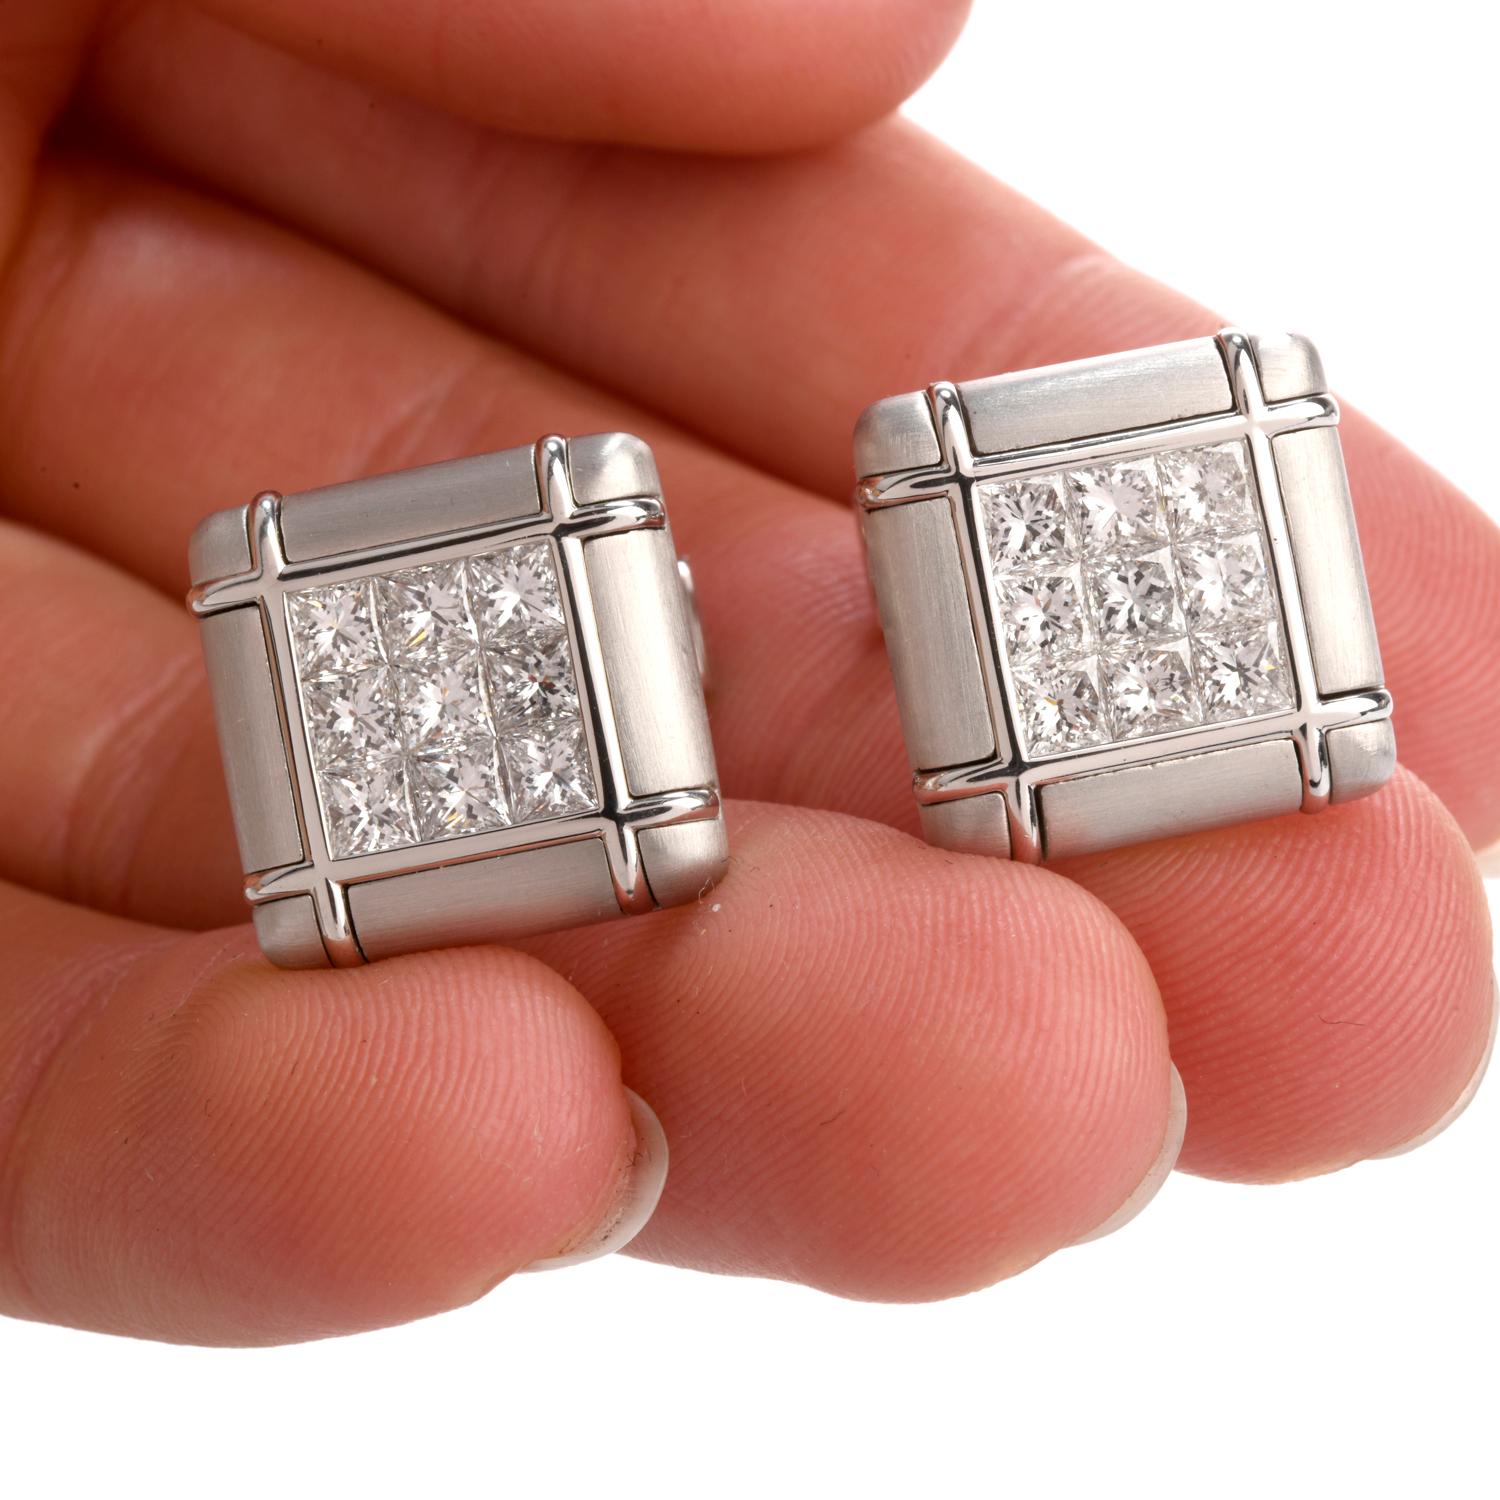 SImple Elegance for the Gentleman who prefers an Understatement!

Luxurious 18K Satin Finished White Gold cross boards run the diameter 

with 9 Invisibly set Princess cut Diamonds in each.

Diamonds weighing cumulatively appx. 3.06 carats are are